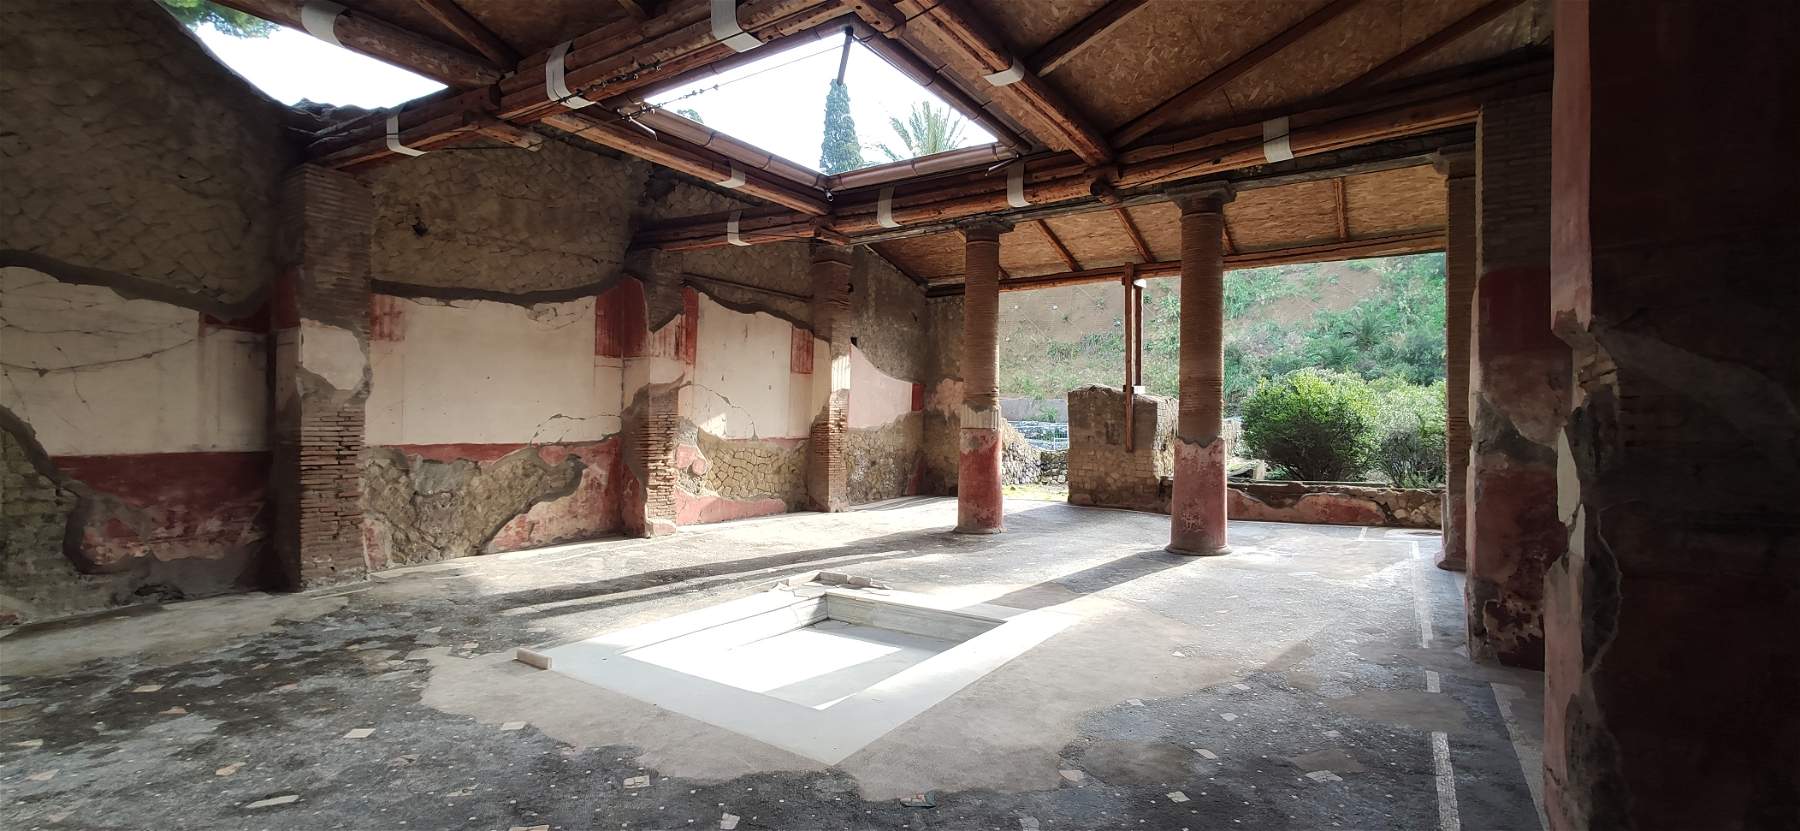 Herculaneum Archaeological Park's Gem House opens to the public 